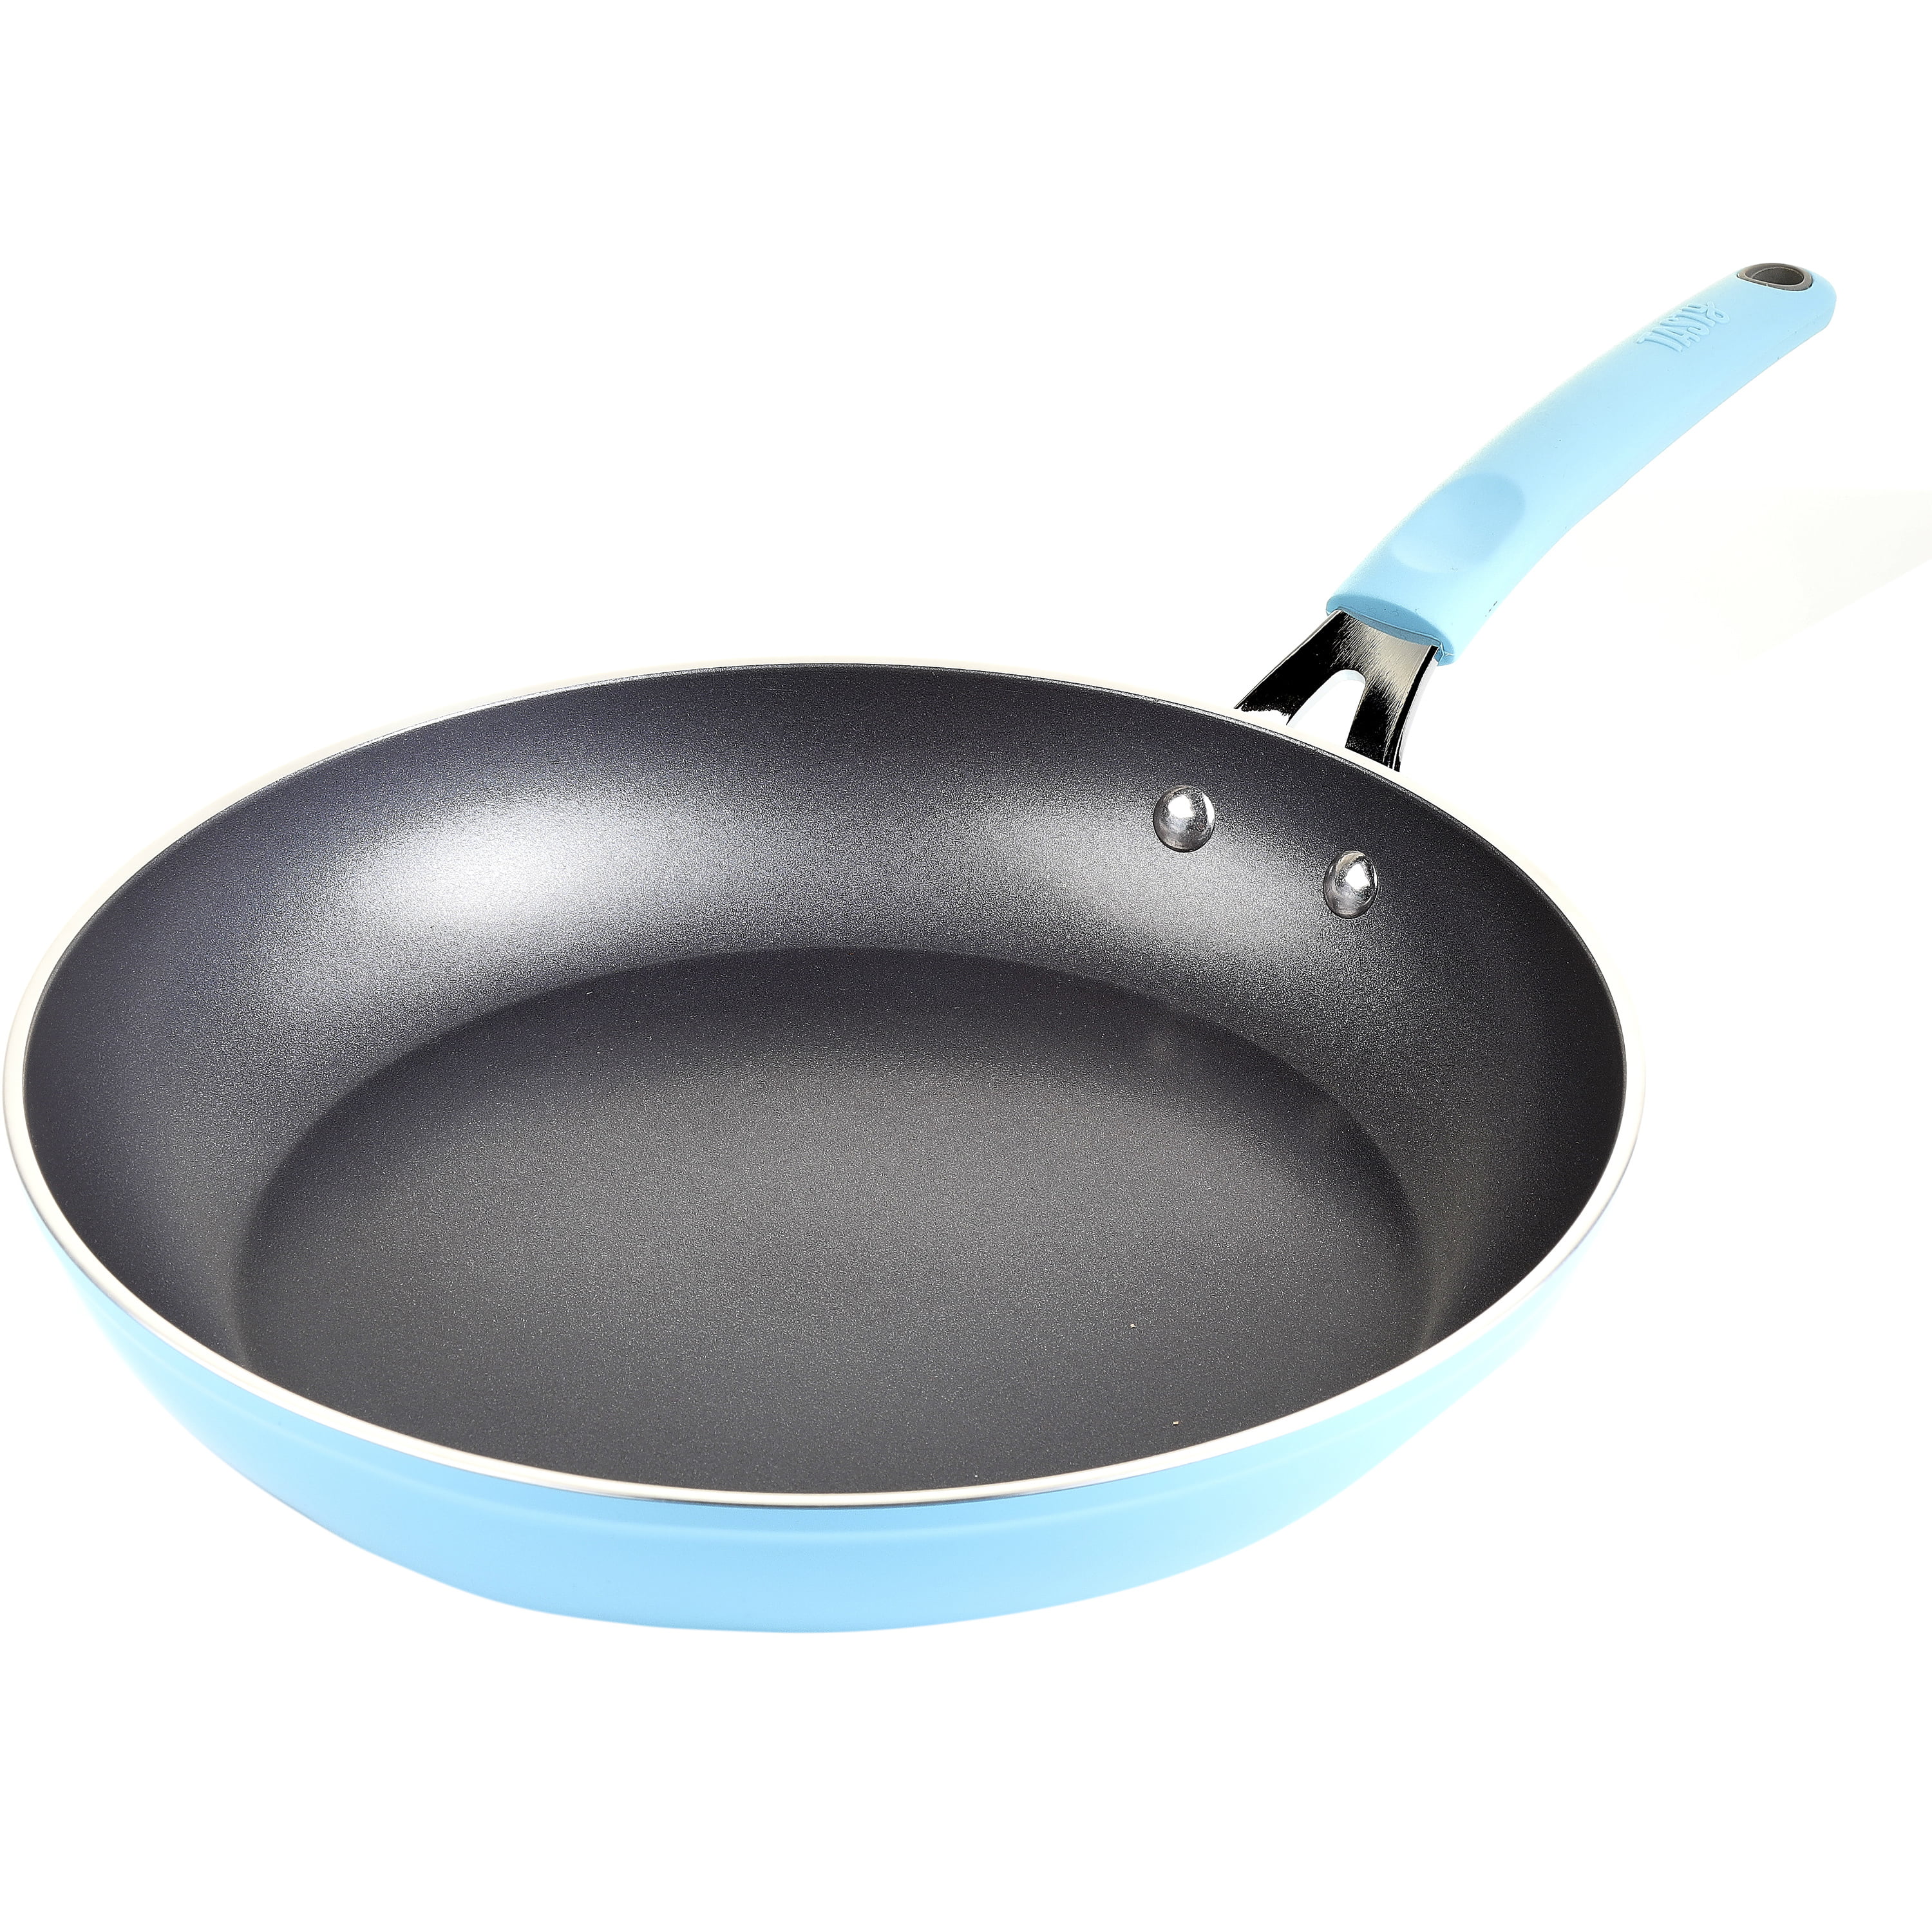 11 Nonstick Frying Pan with Lid - 11 Inch Nonstick Skillets with USA Blue  Gradient Granite Derived Coating, Heat-resisted Silicon Handle, PFOA &PFOS